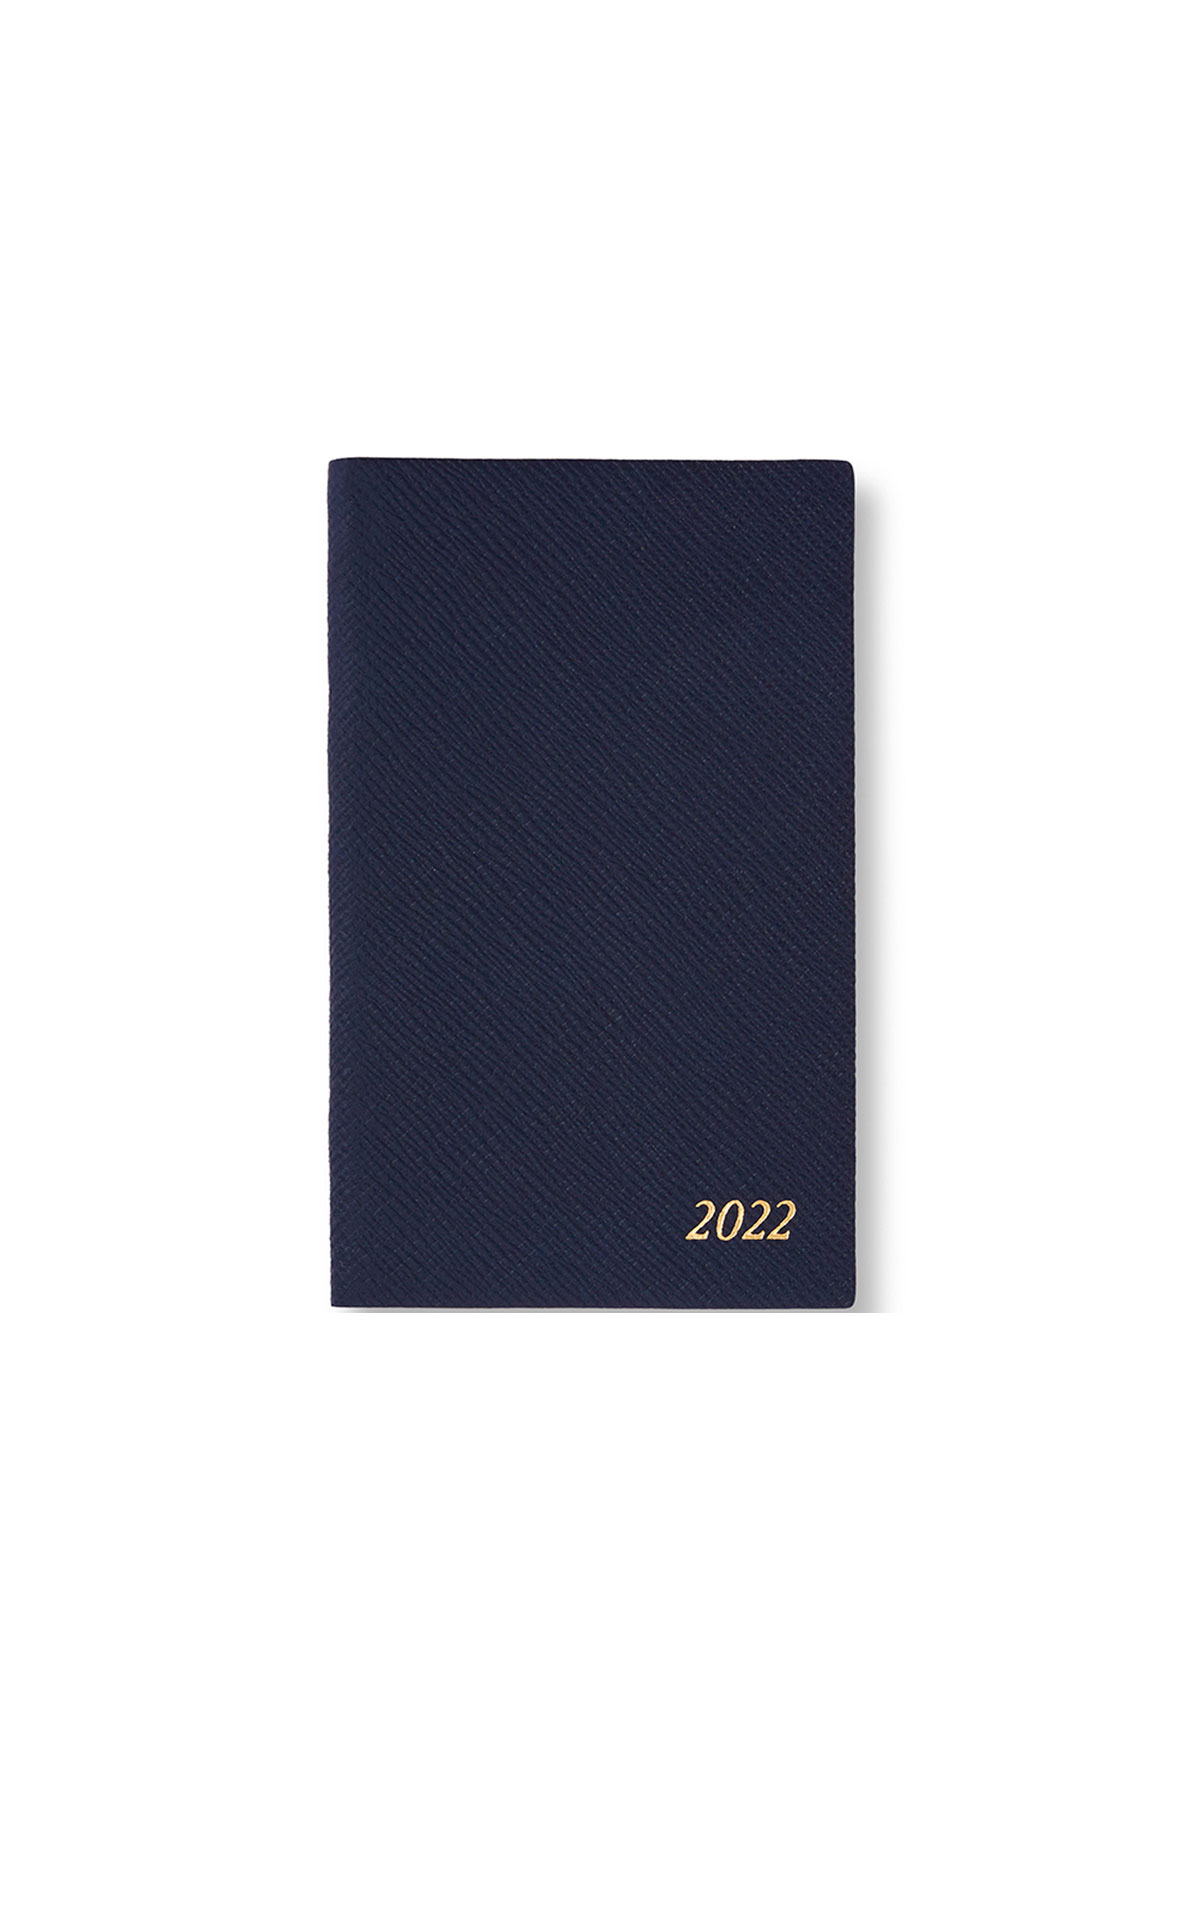 Smythson 2022 panama diary with pocket navy from Bicester Village